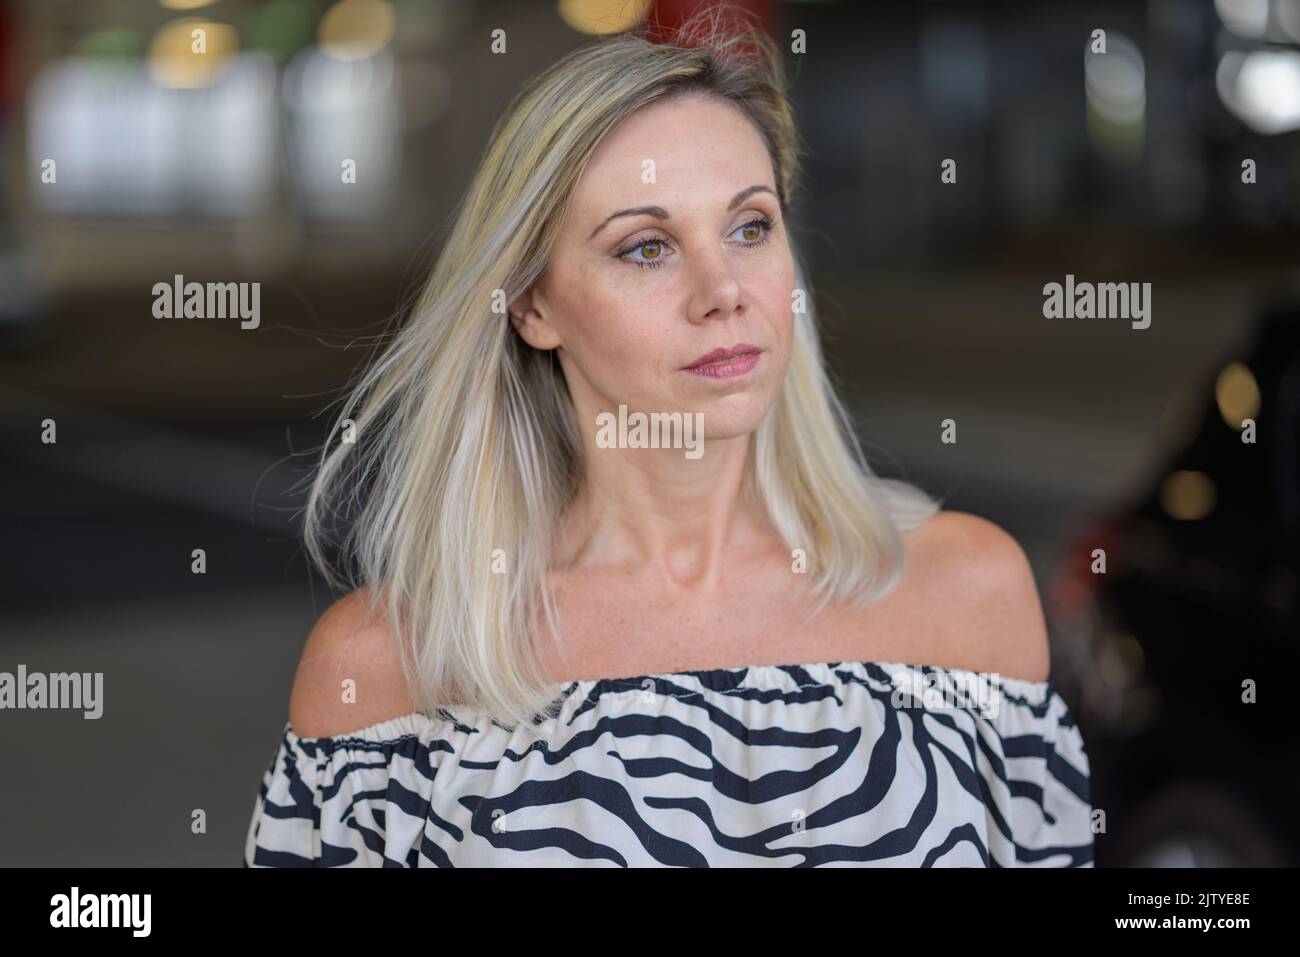 Thoughtful woman walking through an arcade or street at night looking to the side with a pensive expression in close up Stock Photo